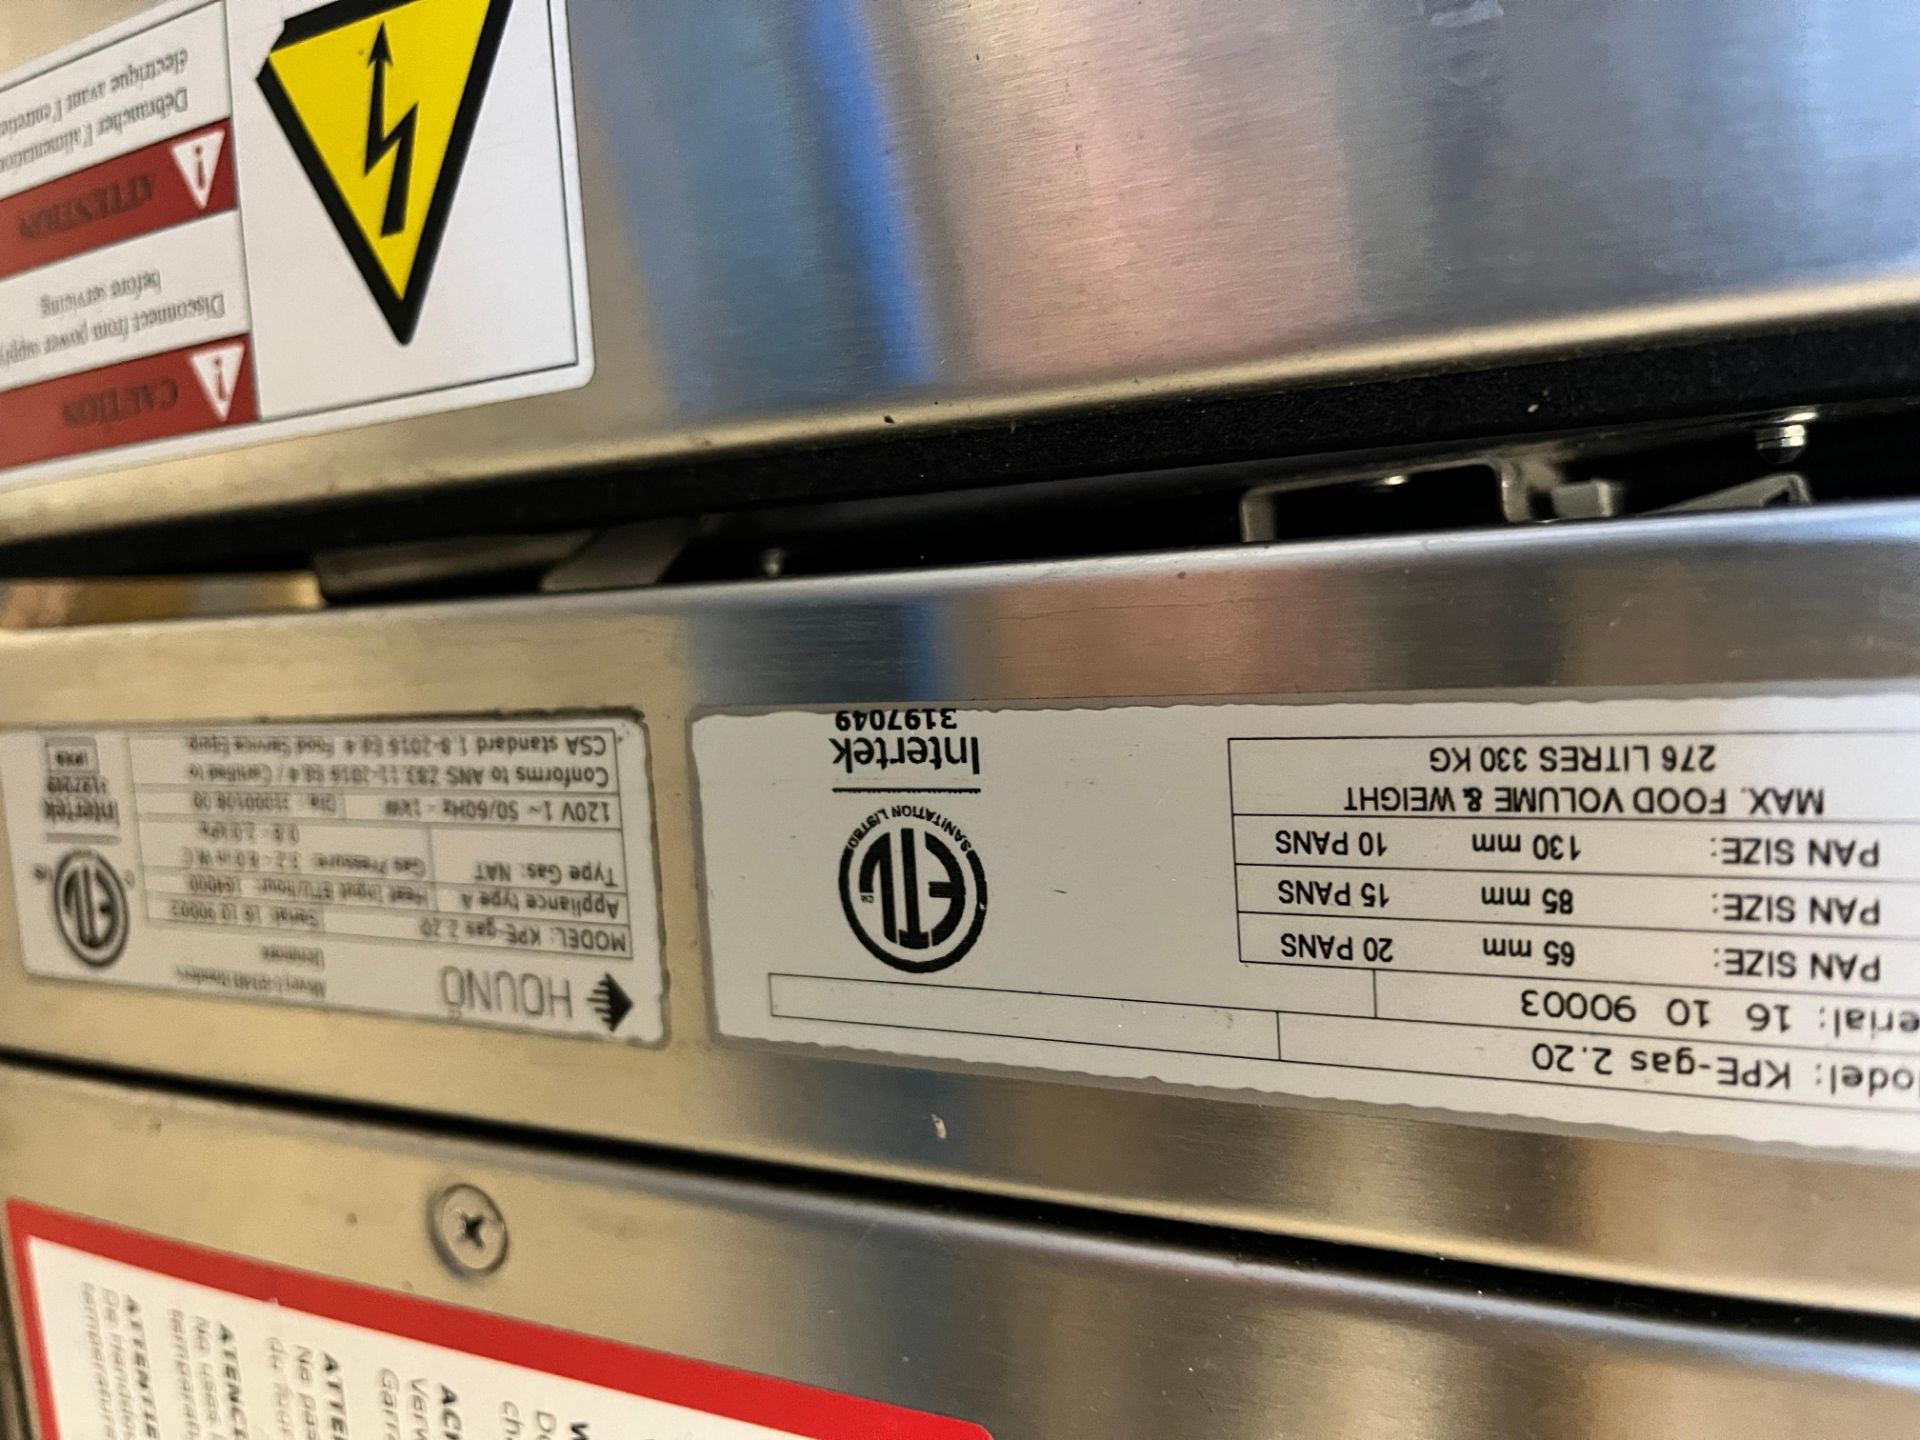 Used Houno Model KPE-Gas 2.20 Oven. Stainless Steel Contacts. Width 1122 mm. Height 1877 mm. 120 - Bild 5 aus 6